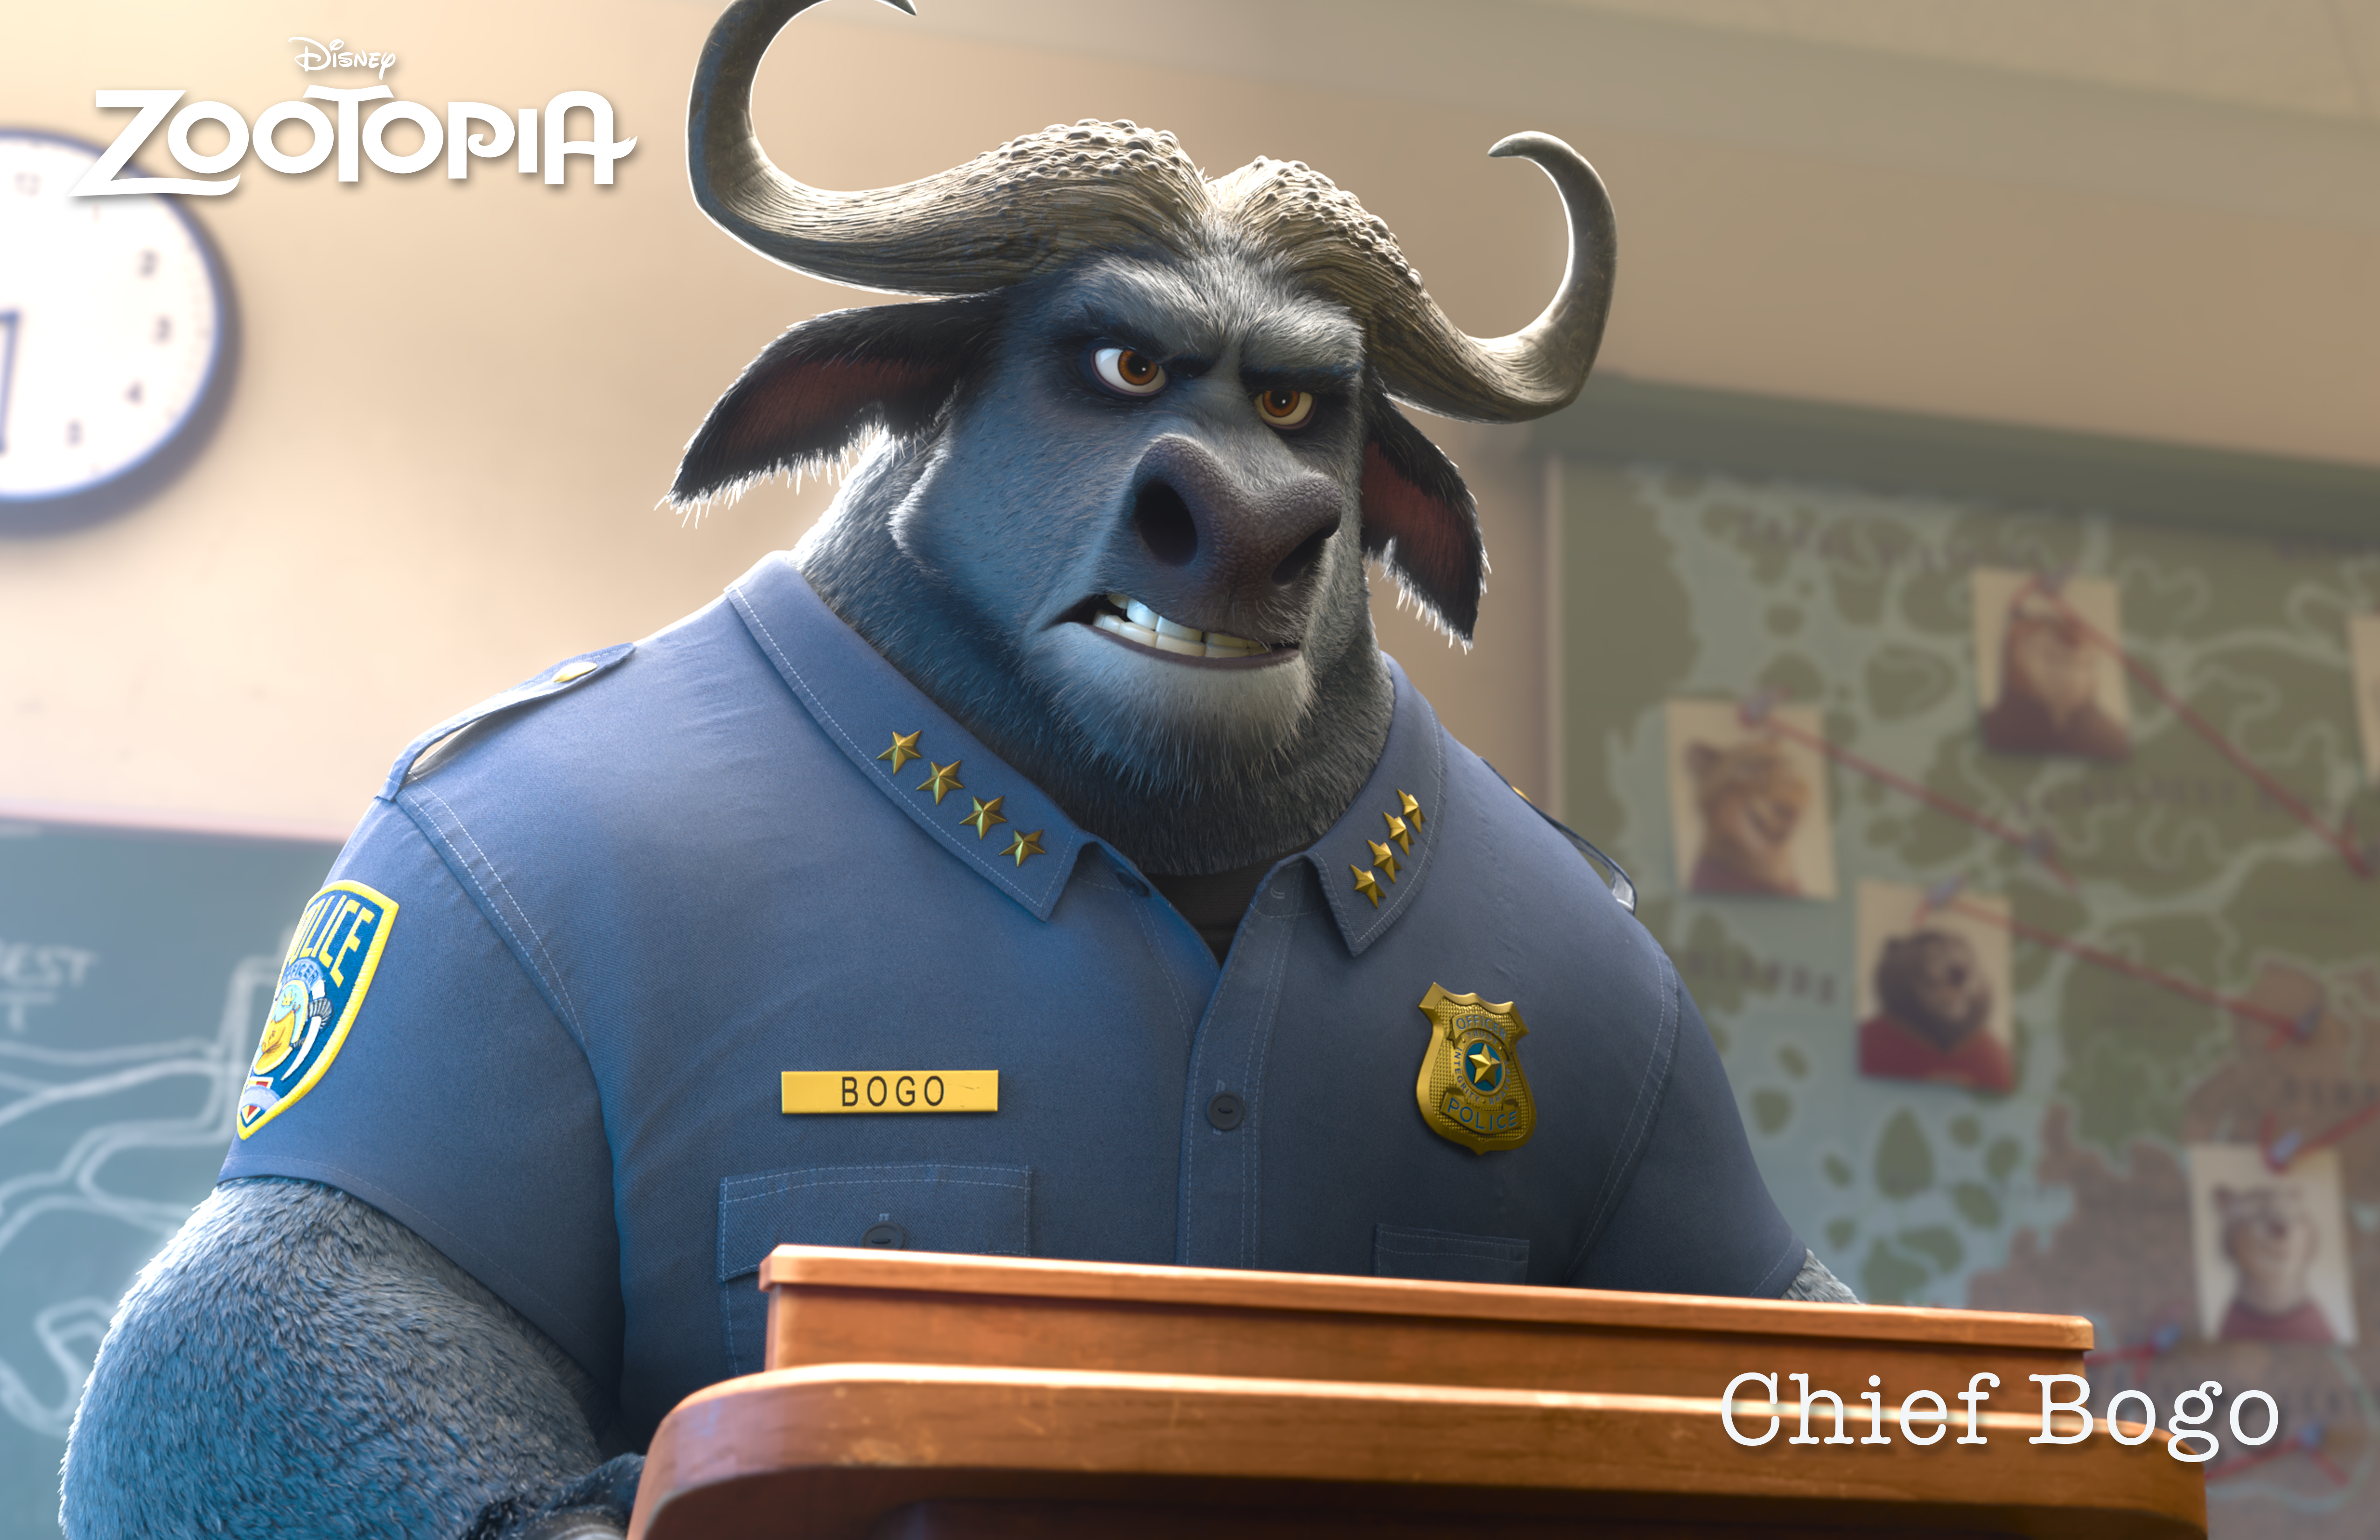 ZOOTOPIA – CHIEF BOGO, head of the Zootopia Police Department. A tough cape buffalo with 2,000 lbs of attitude, Bogo is reluctant to add Judy Hopps, Zootopia’s first bunny cop, to his squad of hardened rhinos, elephants and hippos. ©2015 Disney. All Rights Reserved.